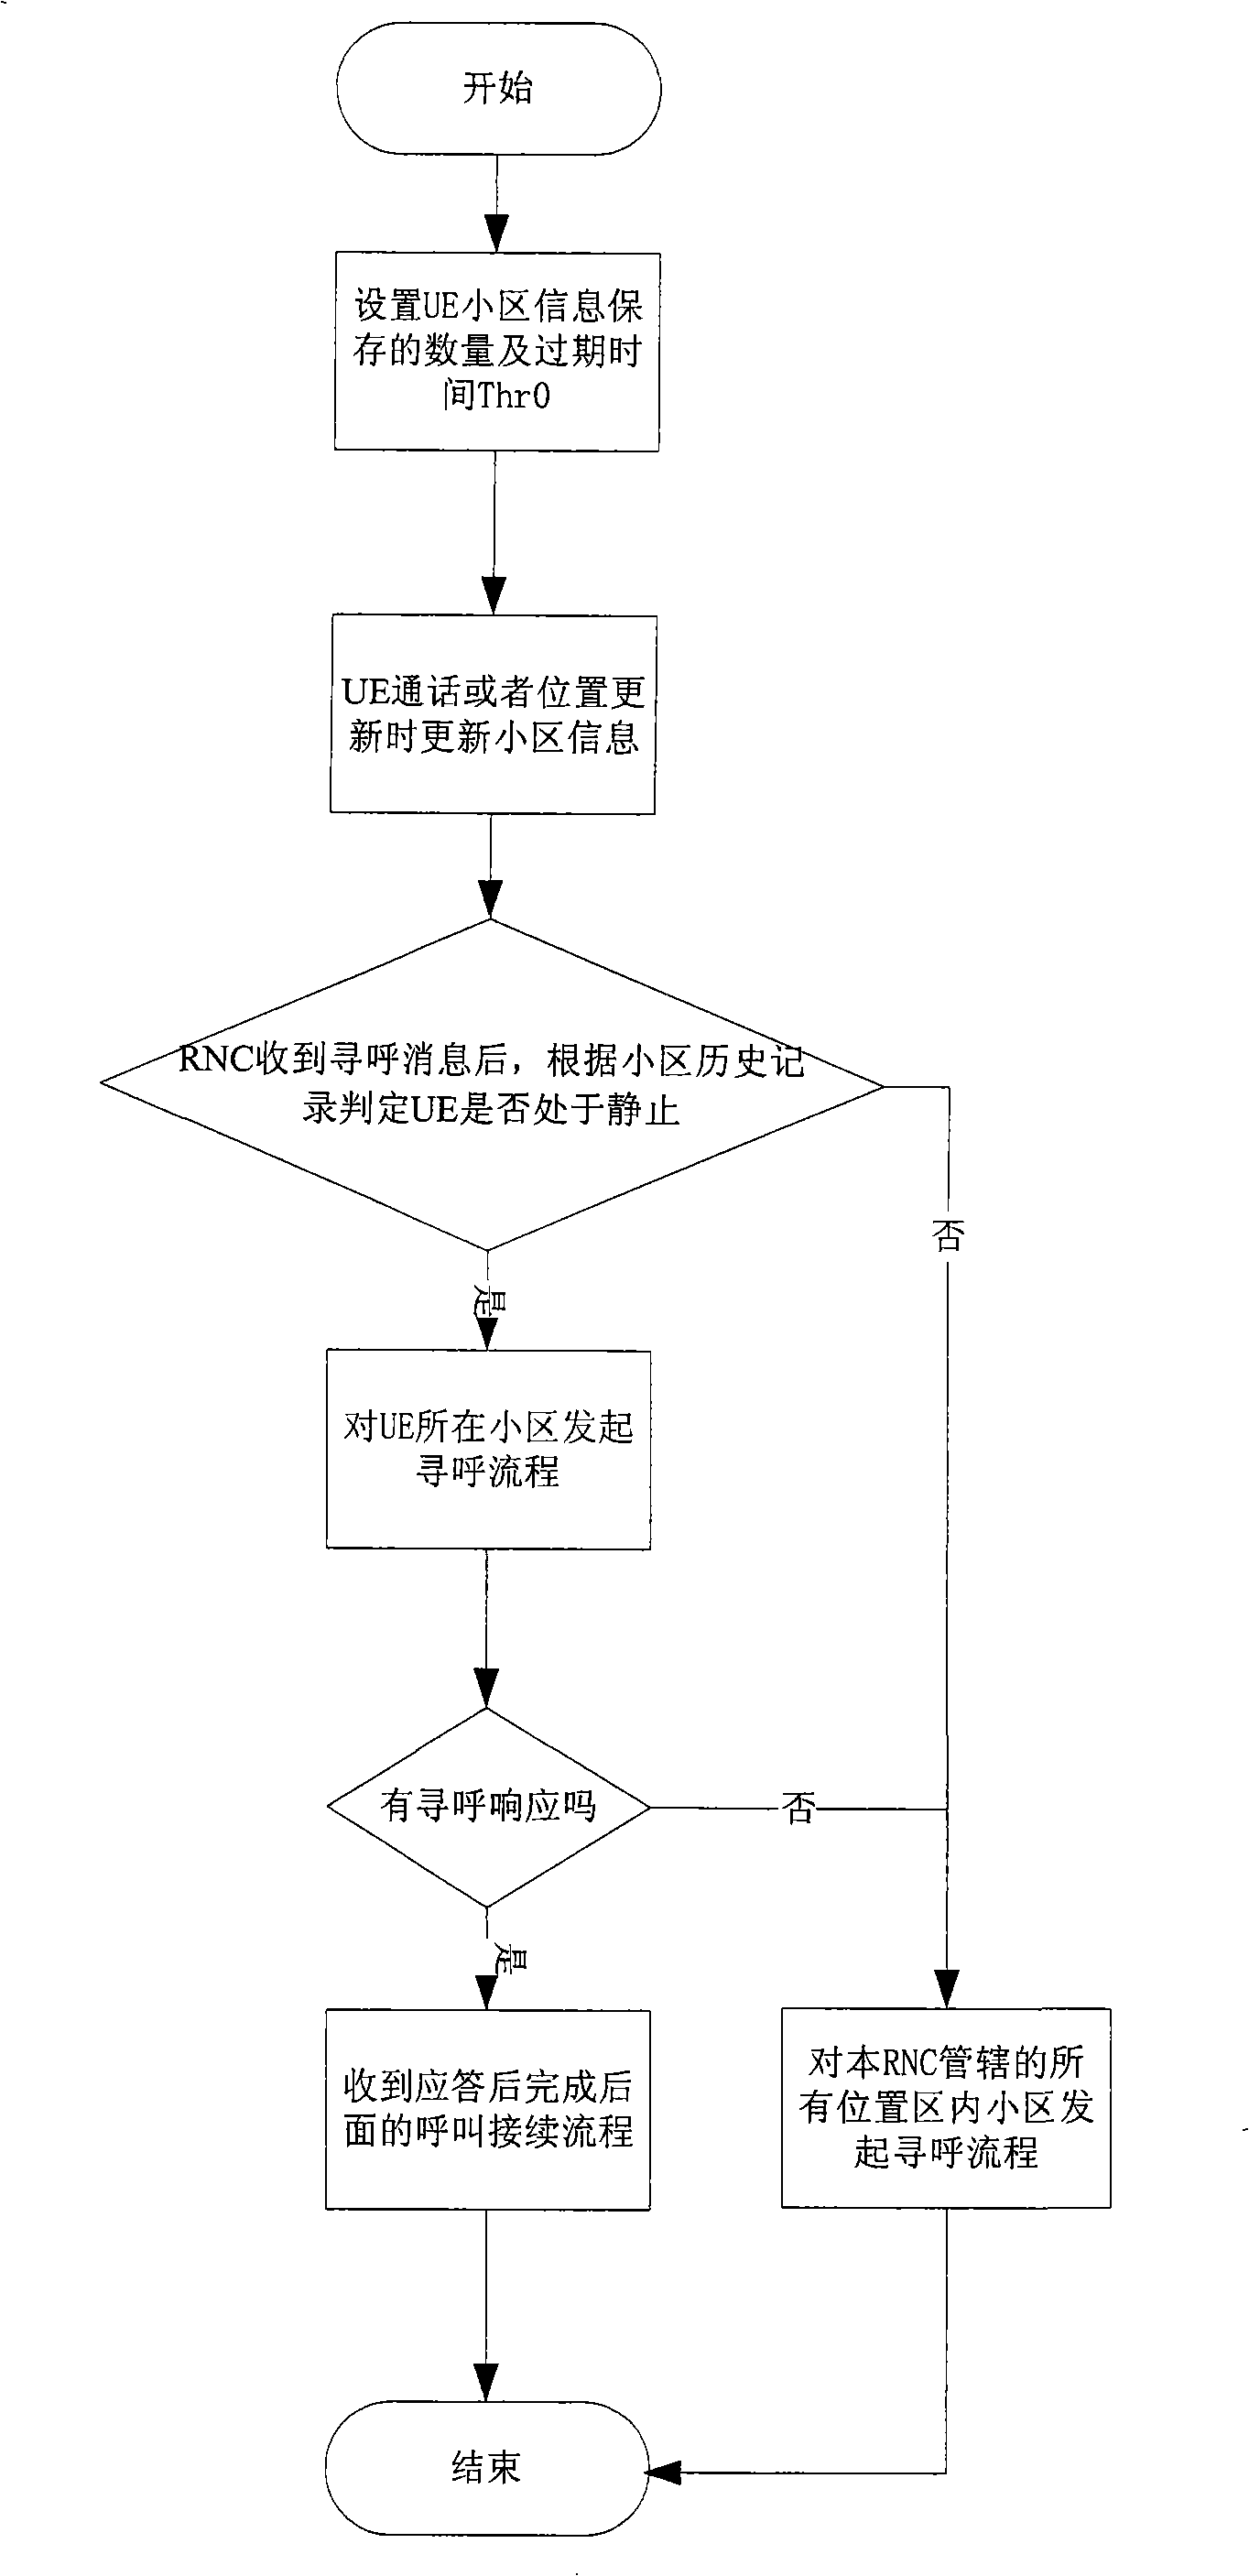 Method for paging user terminal in a radio communication system